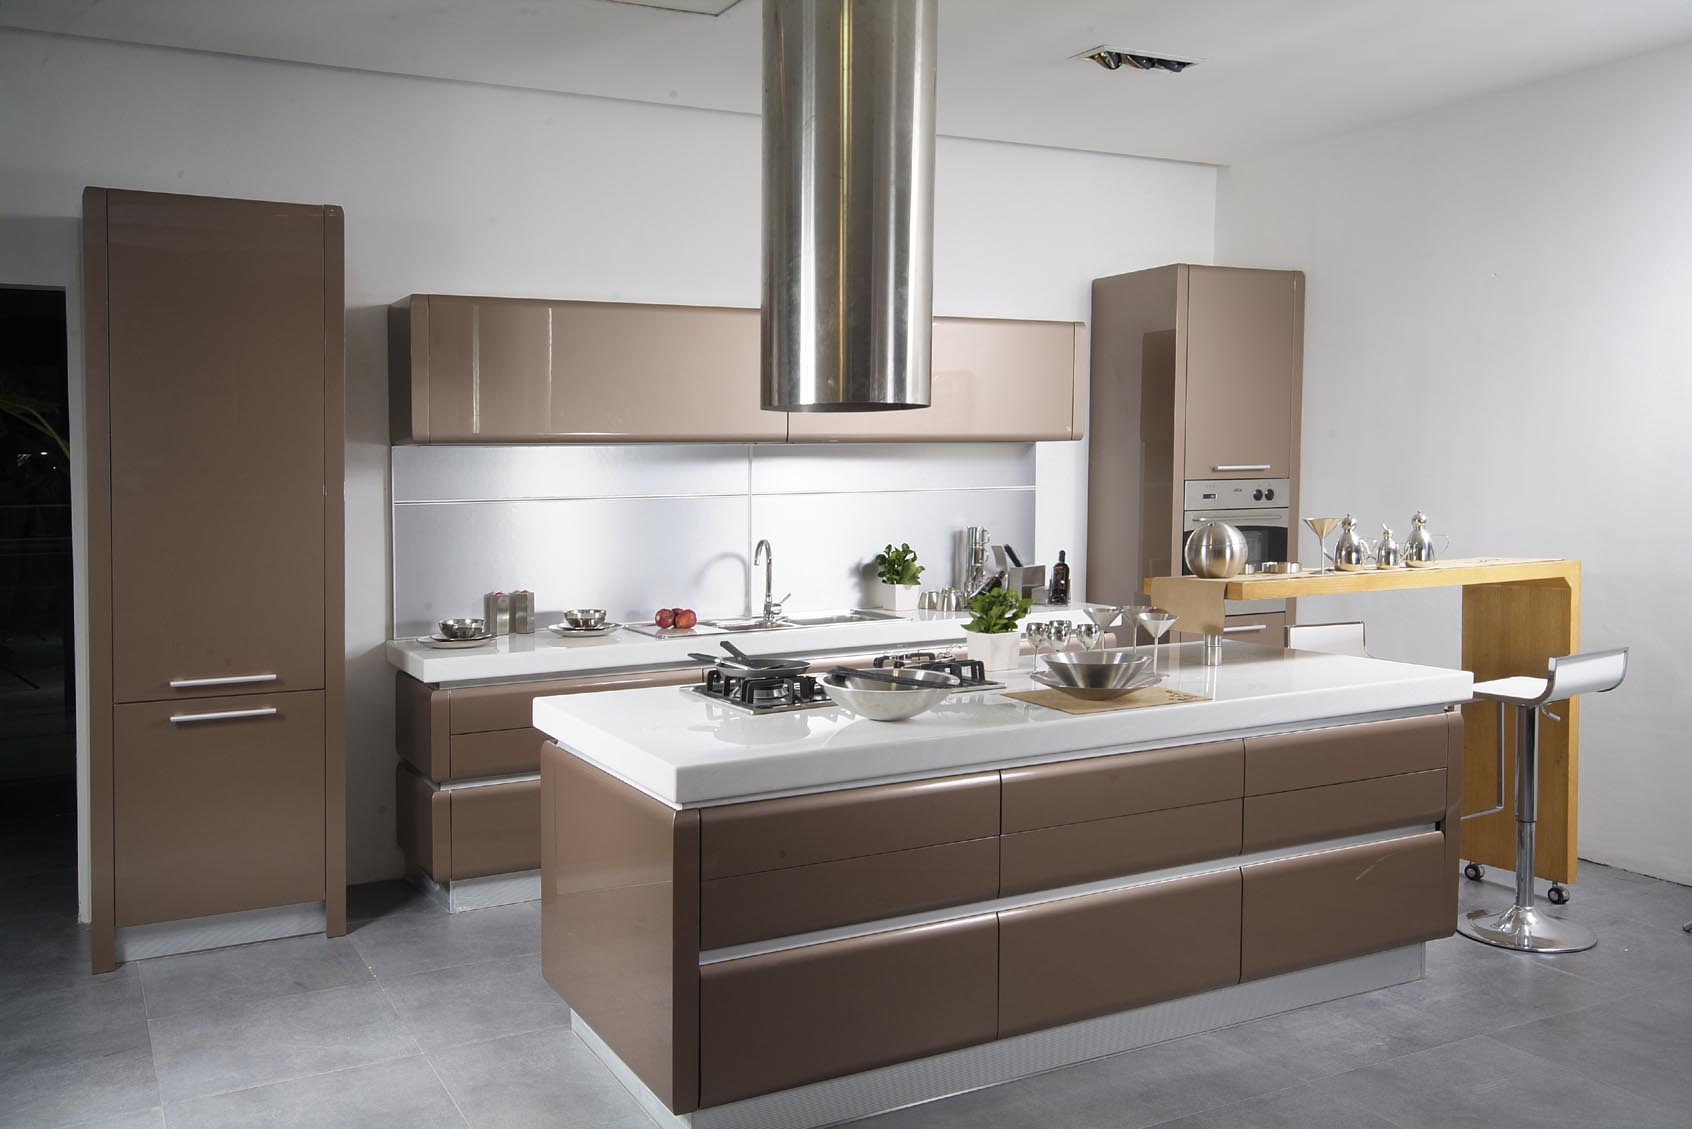 Modern Small Ideas Cool Modern Small Kitchen Design Ideas With Kitchen Island Equipped With Range And Countertop Completed With Cupboard Furnished With Sink And Oven Kitchen Captivating Small Kitchen Design Focus On Family And Functionality